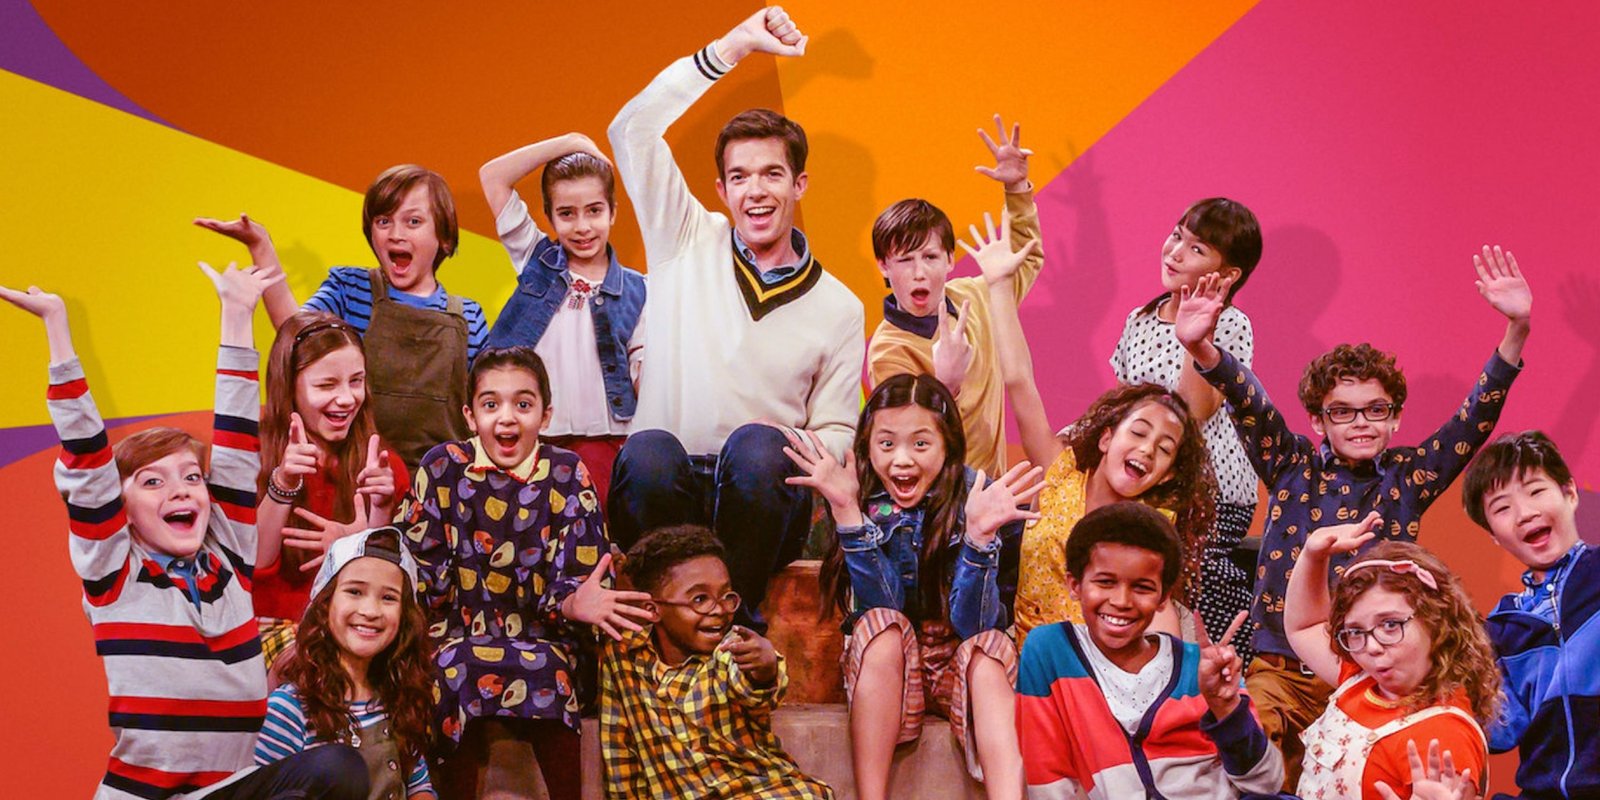 John Mulaney and a group of kids grinning in front of a multicolored background in John Mulaney & The Sack Lunch Bunch